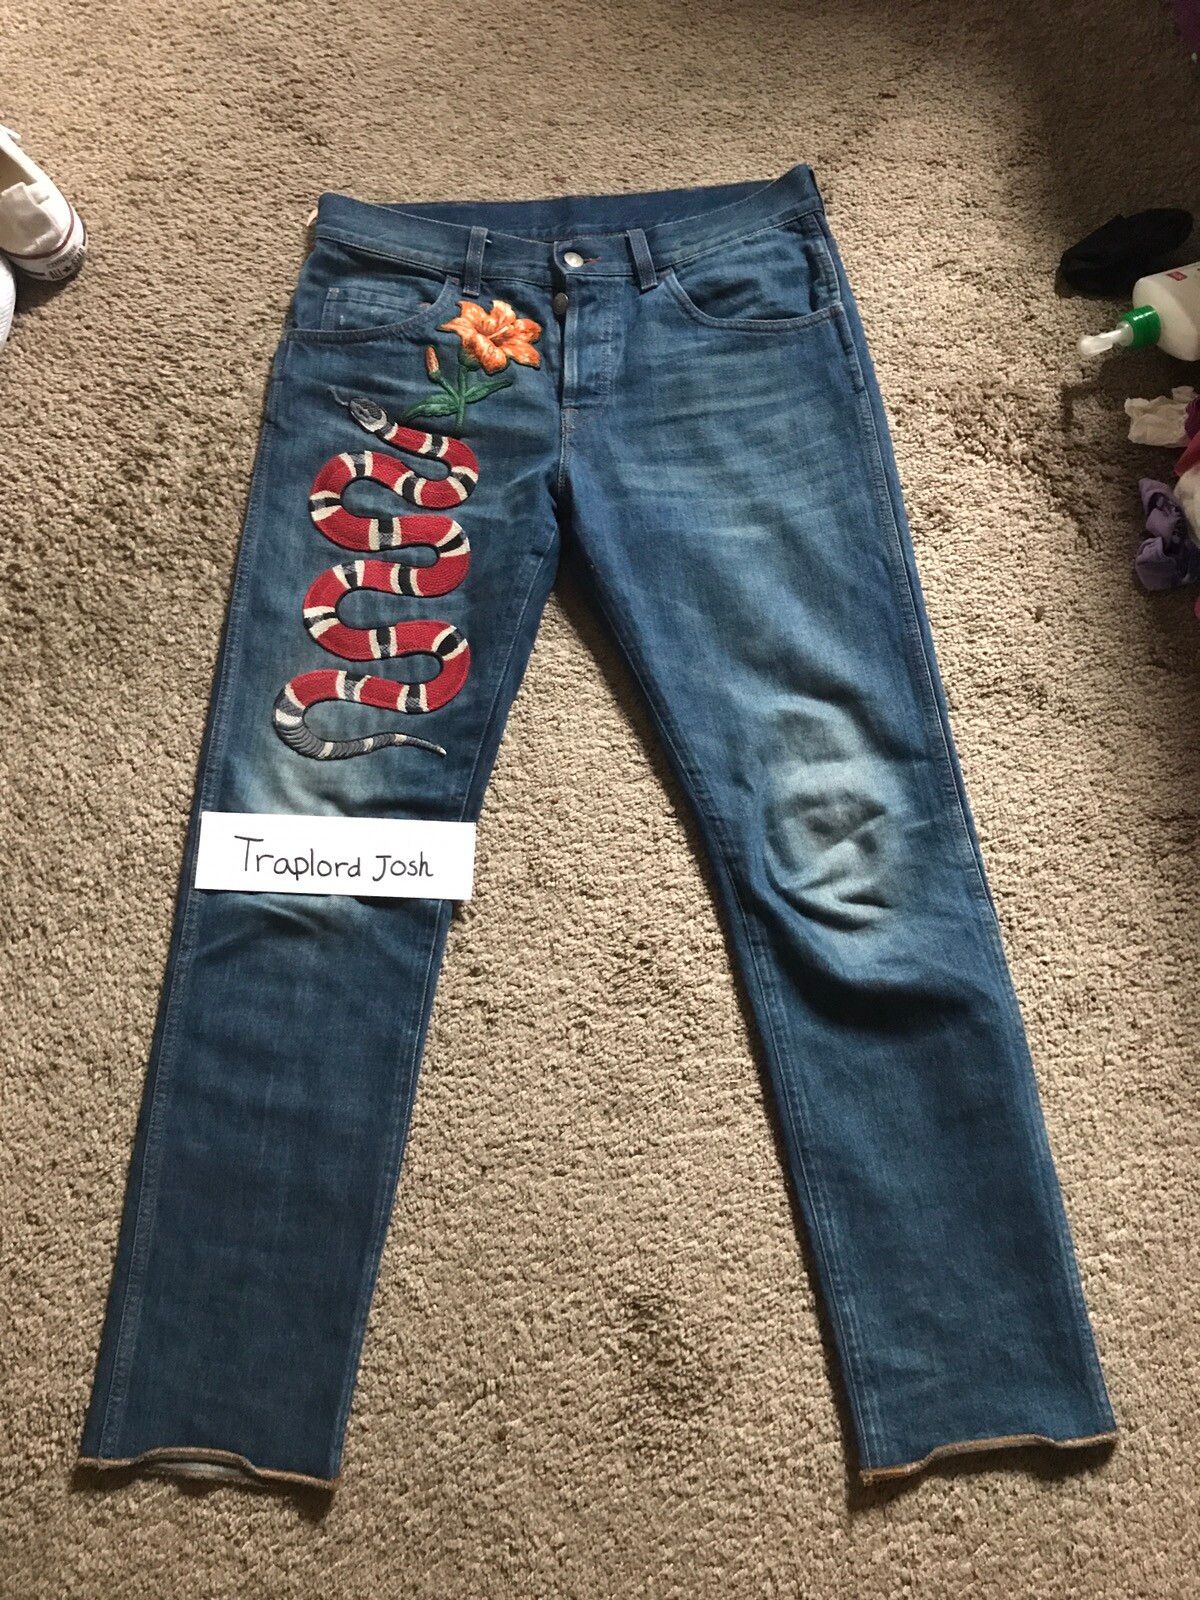 Gucci Snake Jeans | Grailed